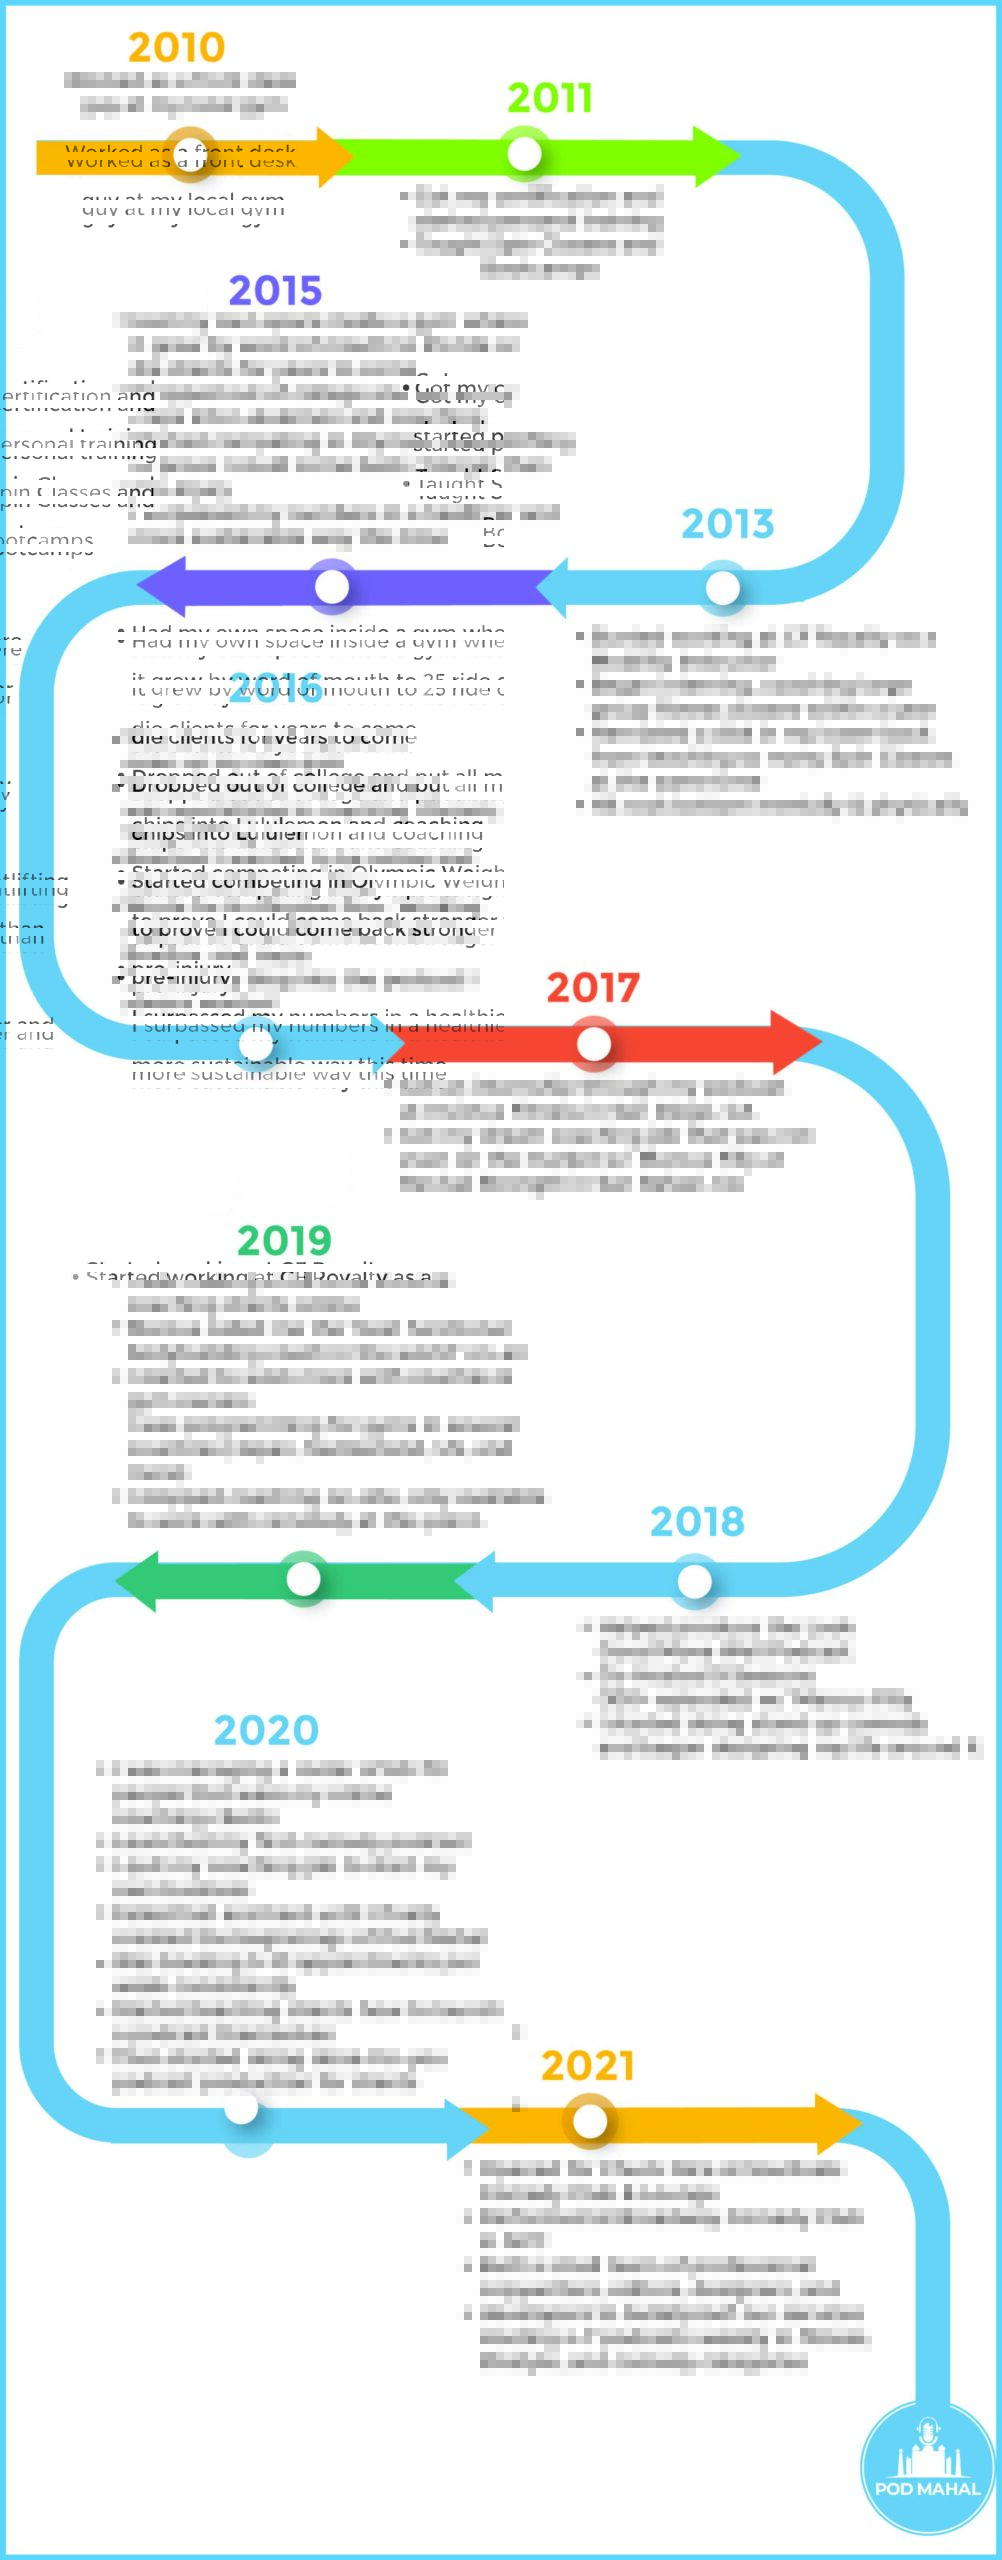 Misbahs-Timeline-Infographic-scaled.jpg